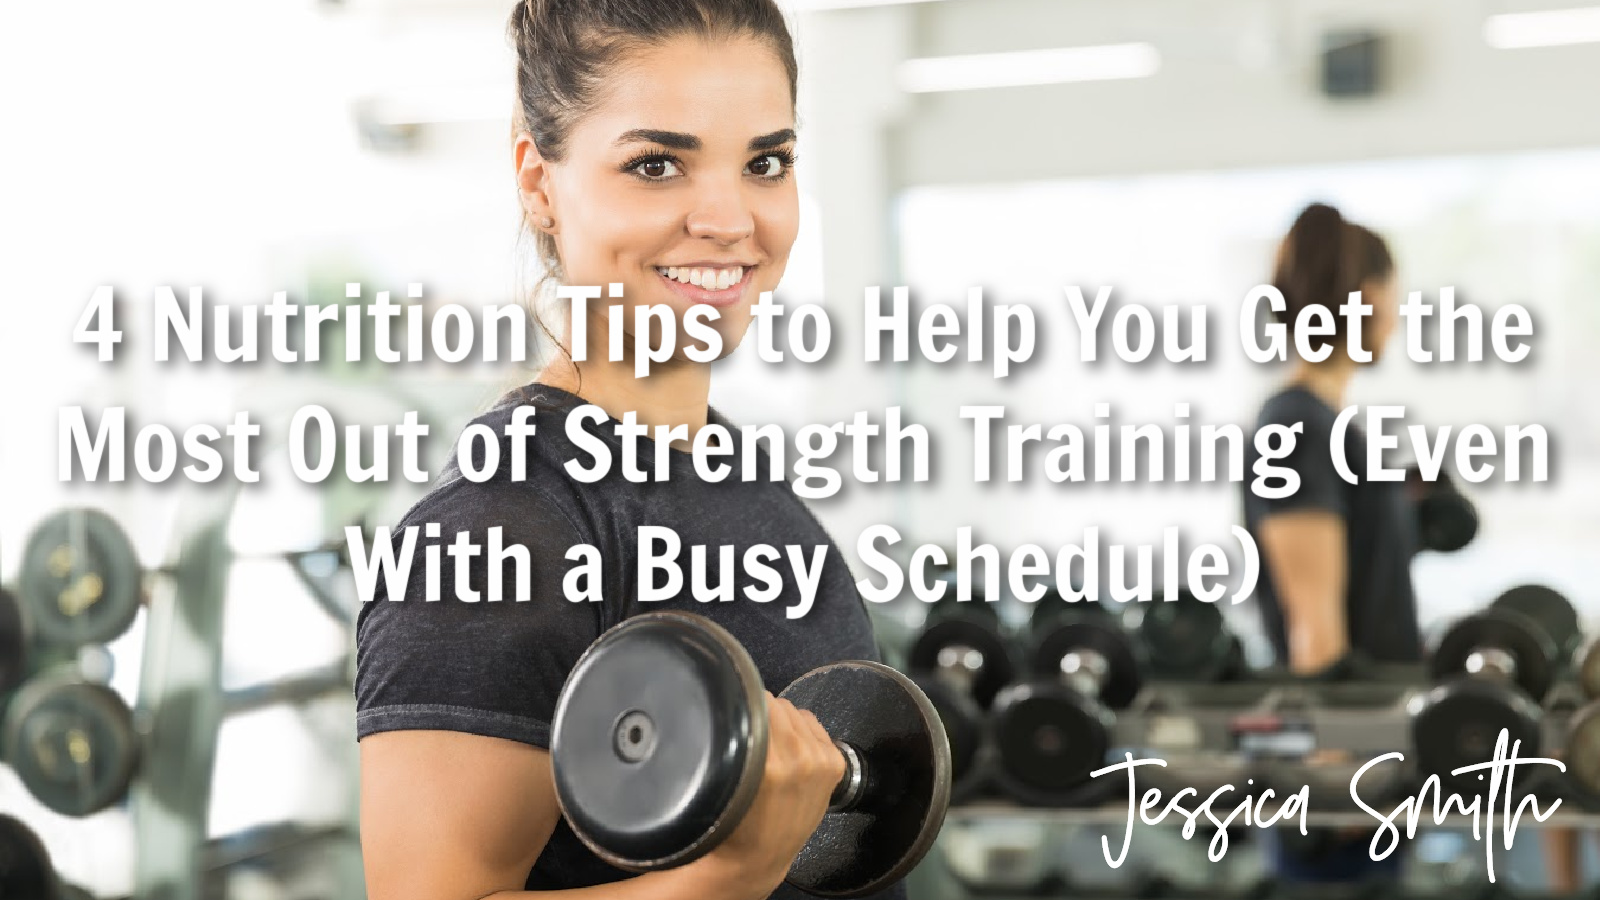 4 Nutrition Tips to Help You Get the Most Out of Strength Training (Even With a Busy Schedule)